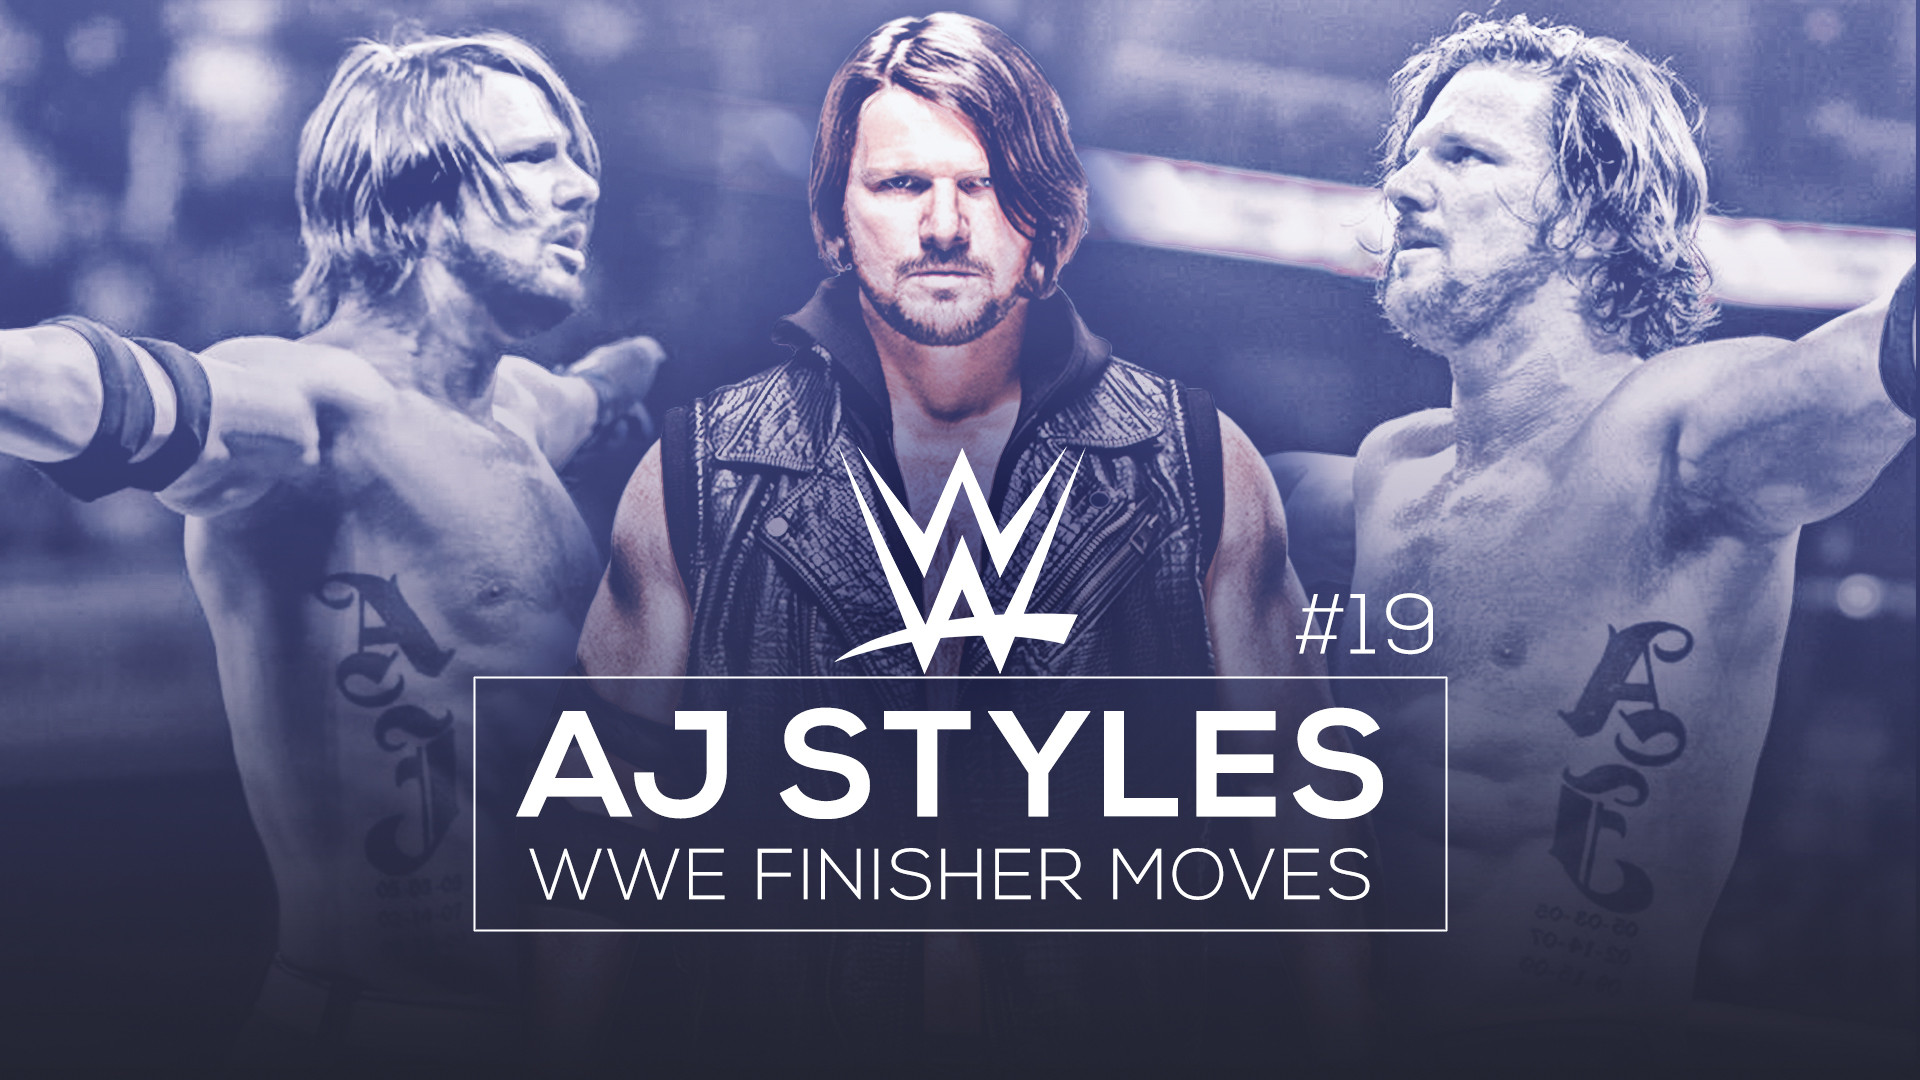 1920x1080 ... WWE Finisher Moves Thumbnail - AJ Styles by BullCrazyLight